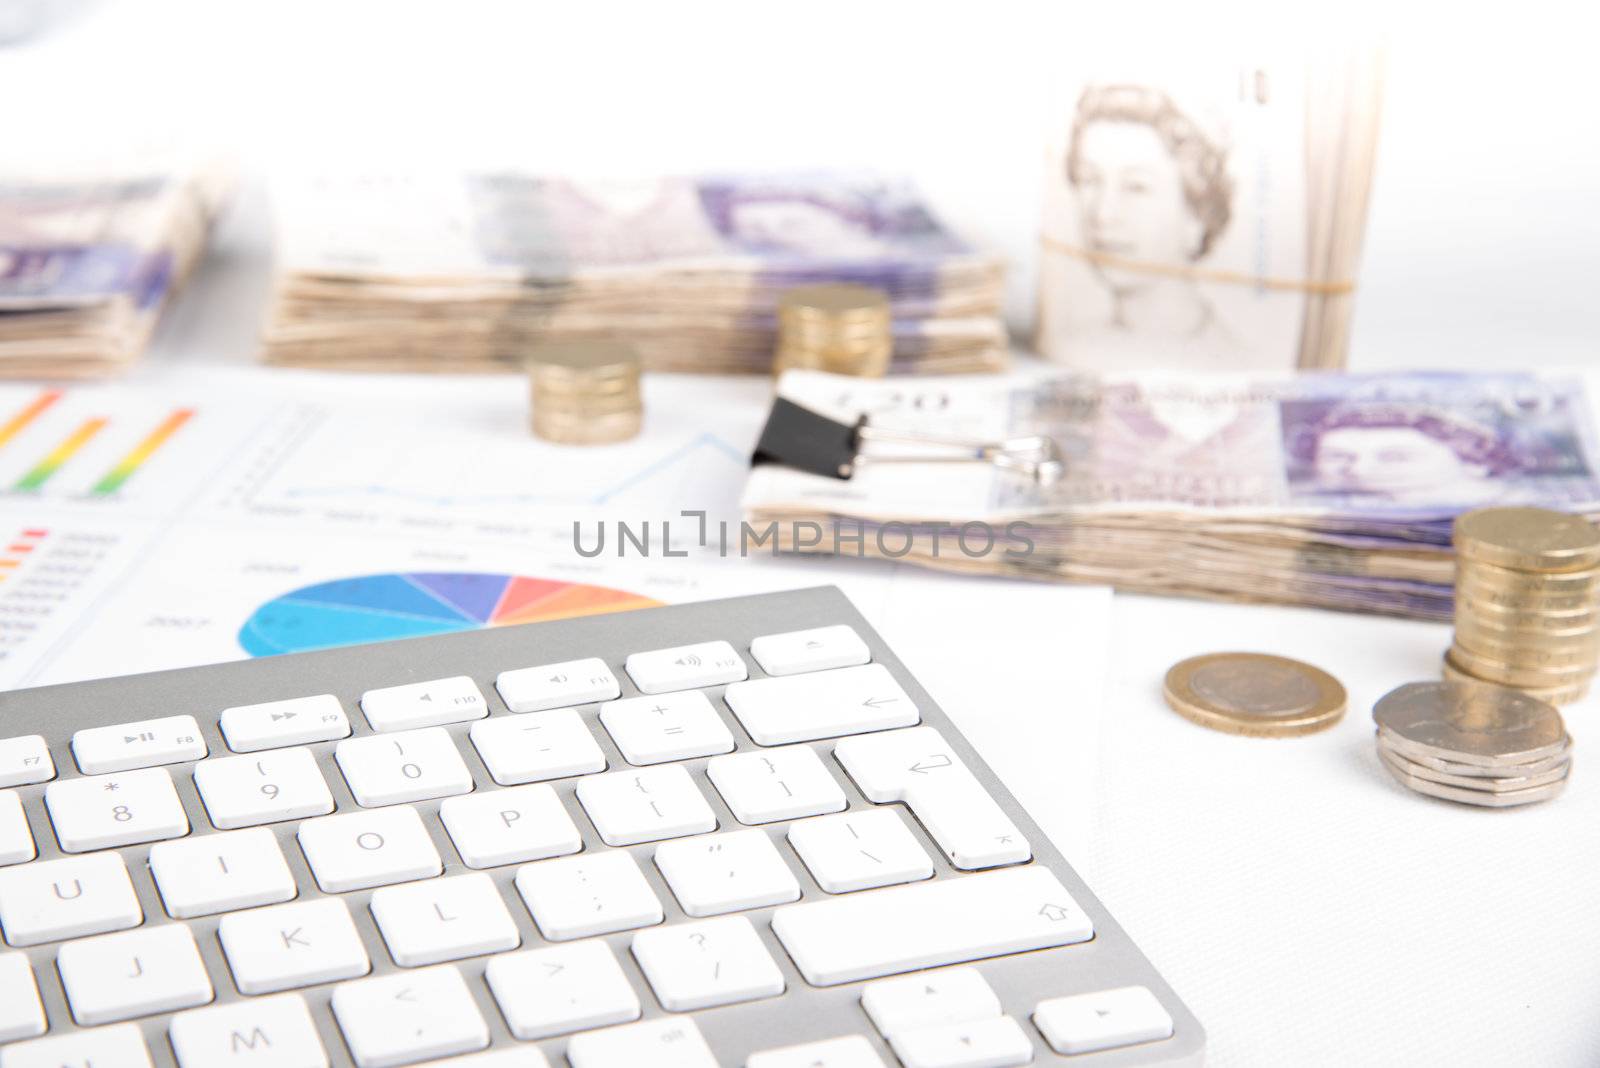 British pound sterling coins and bank notes on desk with keyboard and financial chart